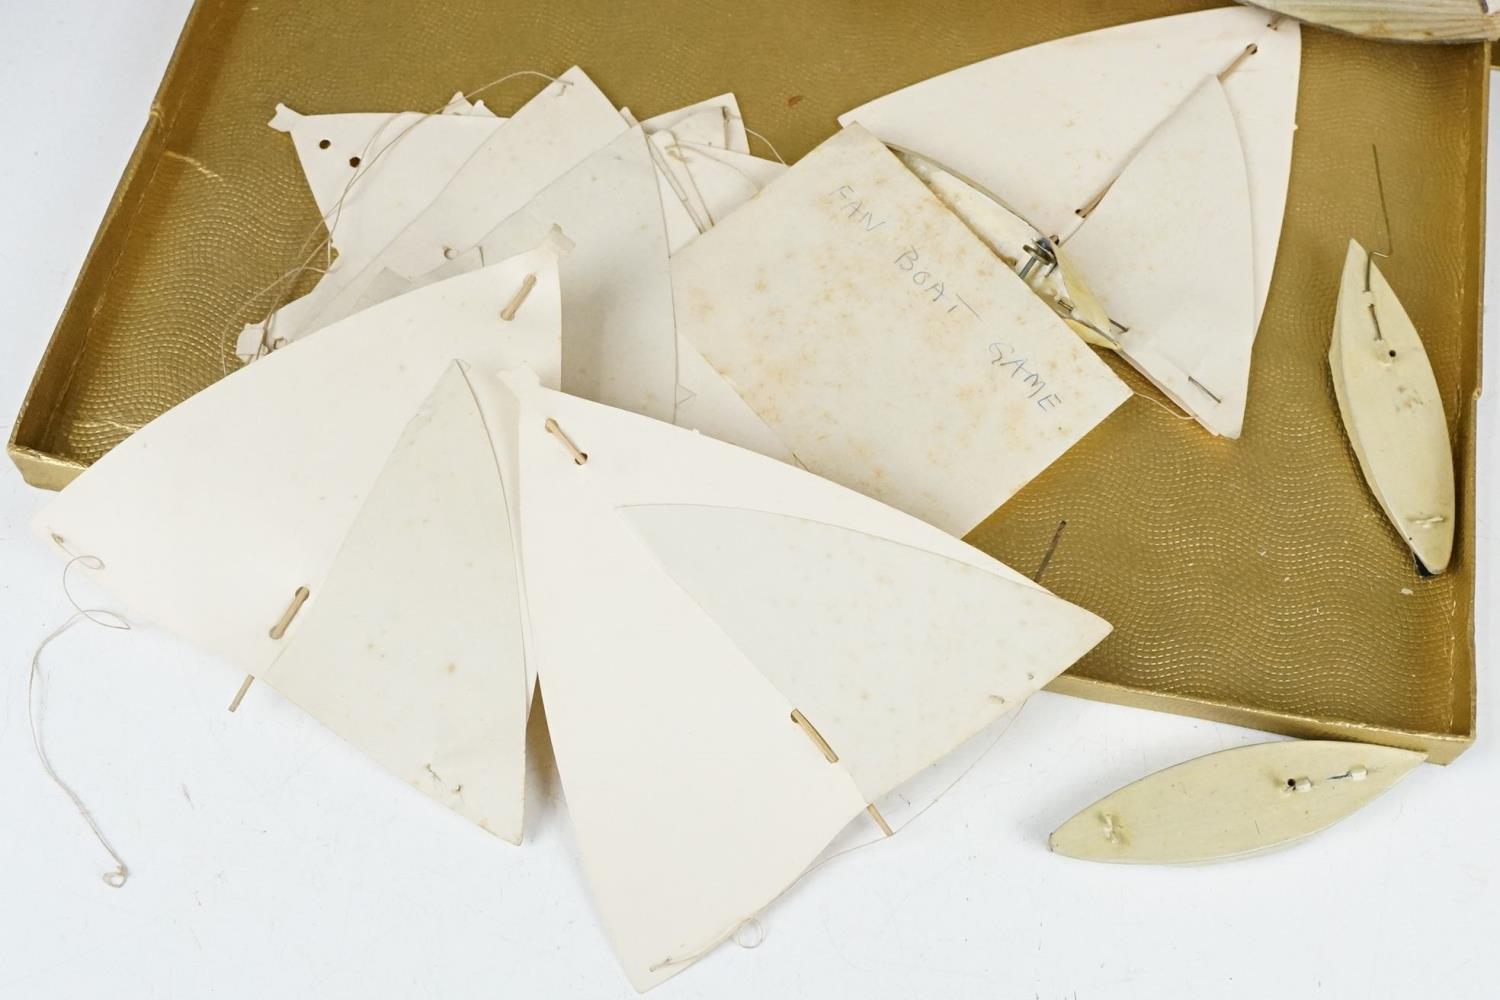 19th Century Victorian japanese boat game consisting of paper fans, with miniature sailing boats. - Image 3 of 8